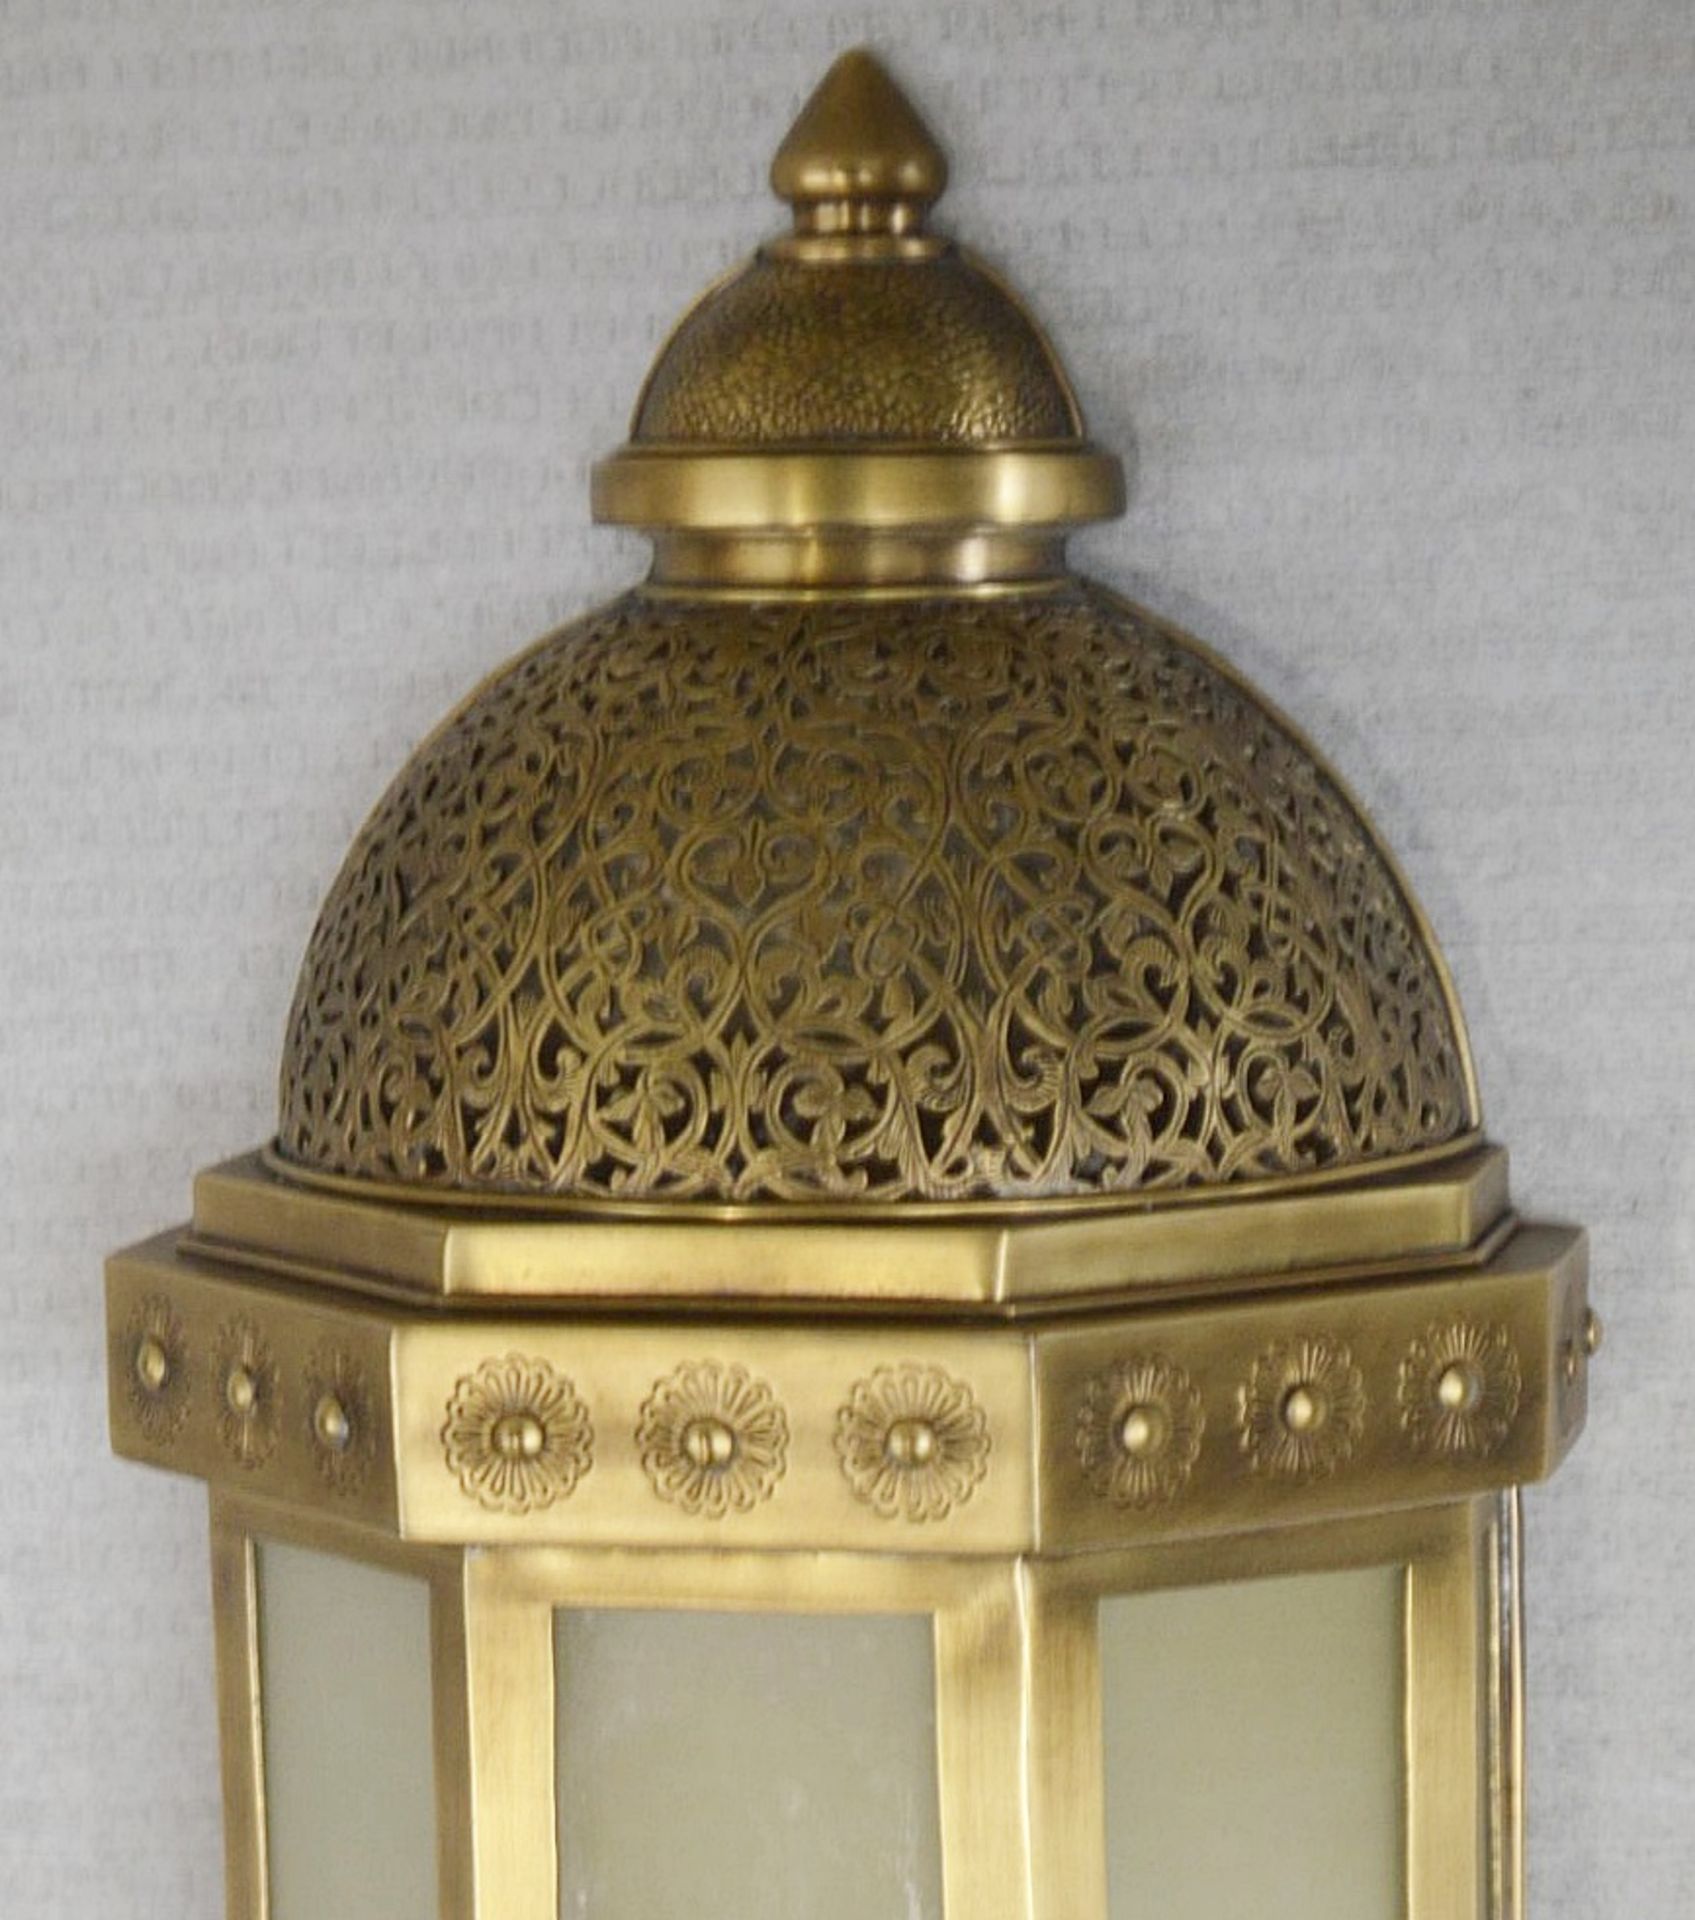 1 x Moroccan-style Brass Wall Light Featuring Intricate Filigree Detailing - Dimensions: Height 80cm - Image 2 of 7